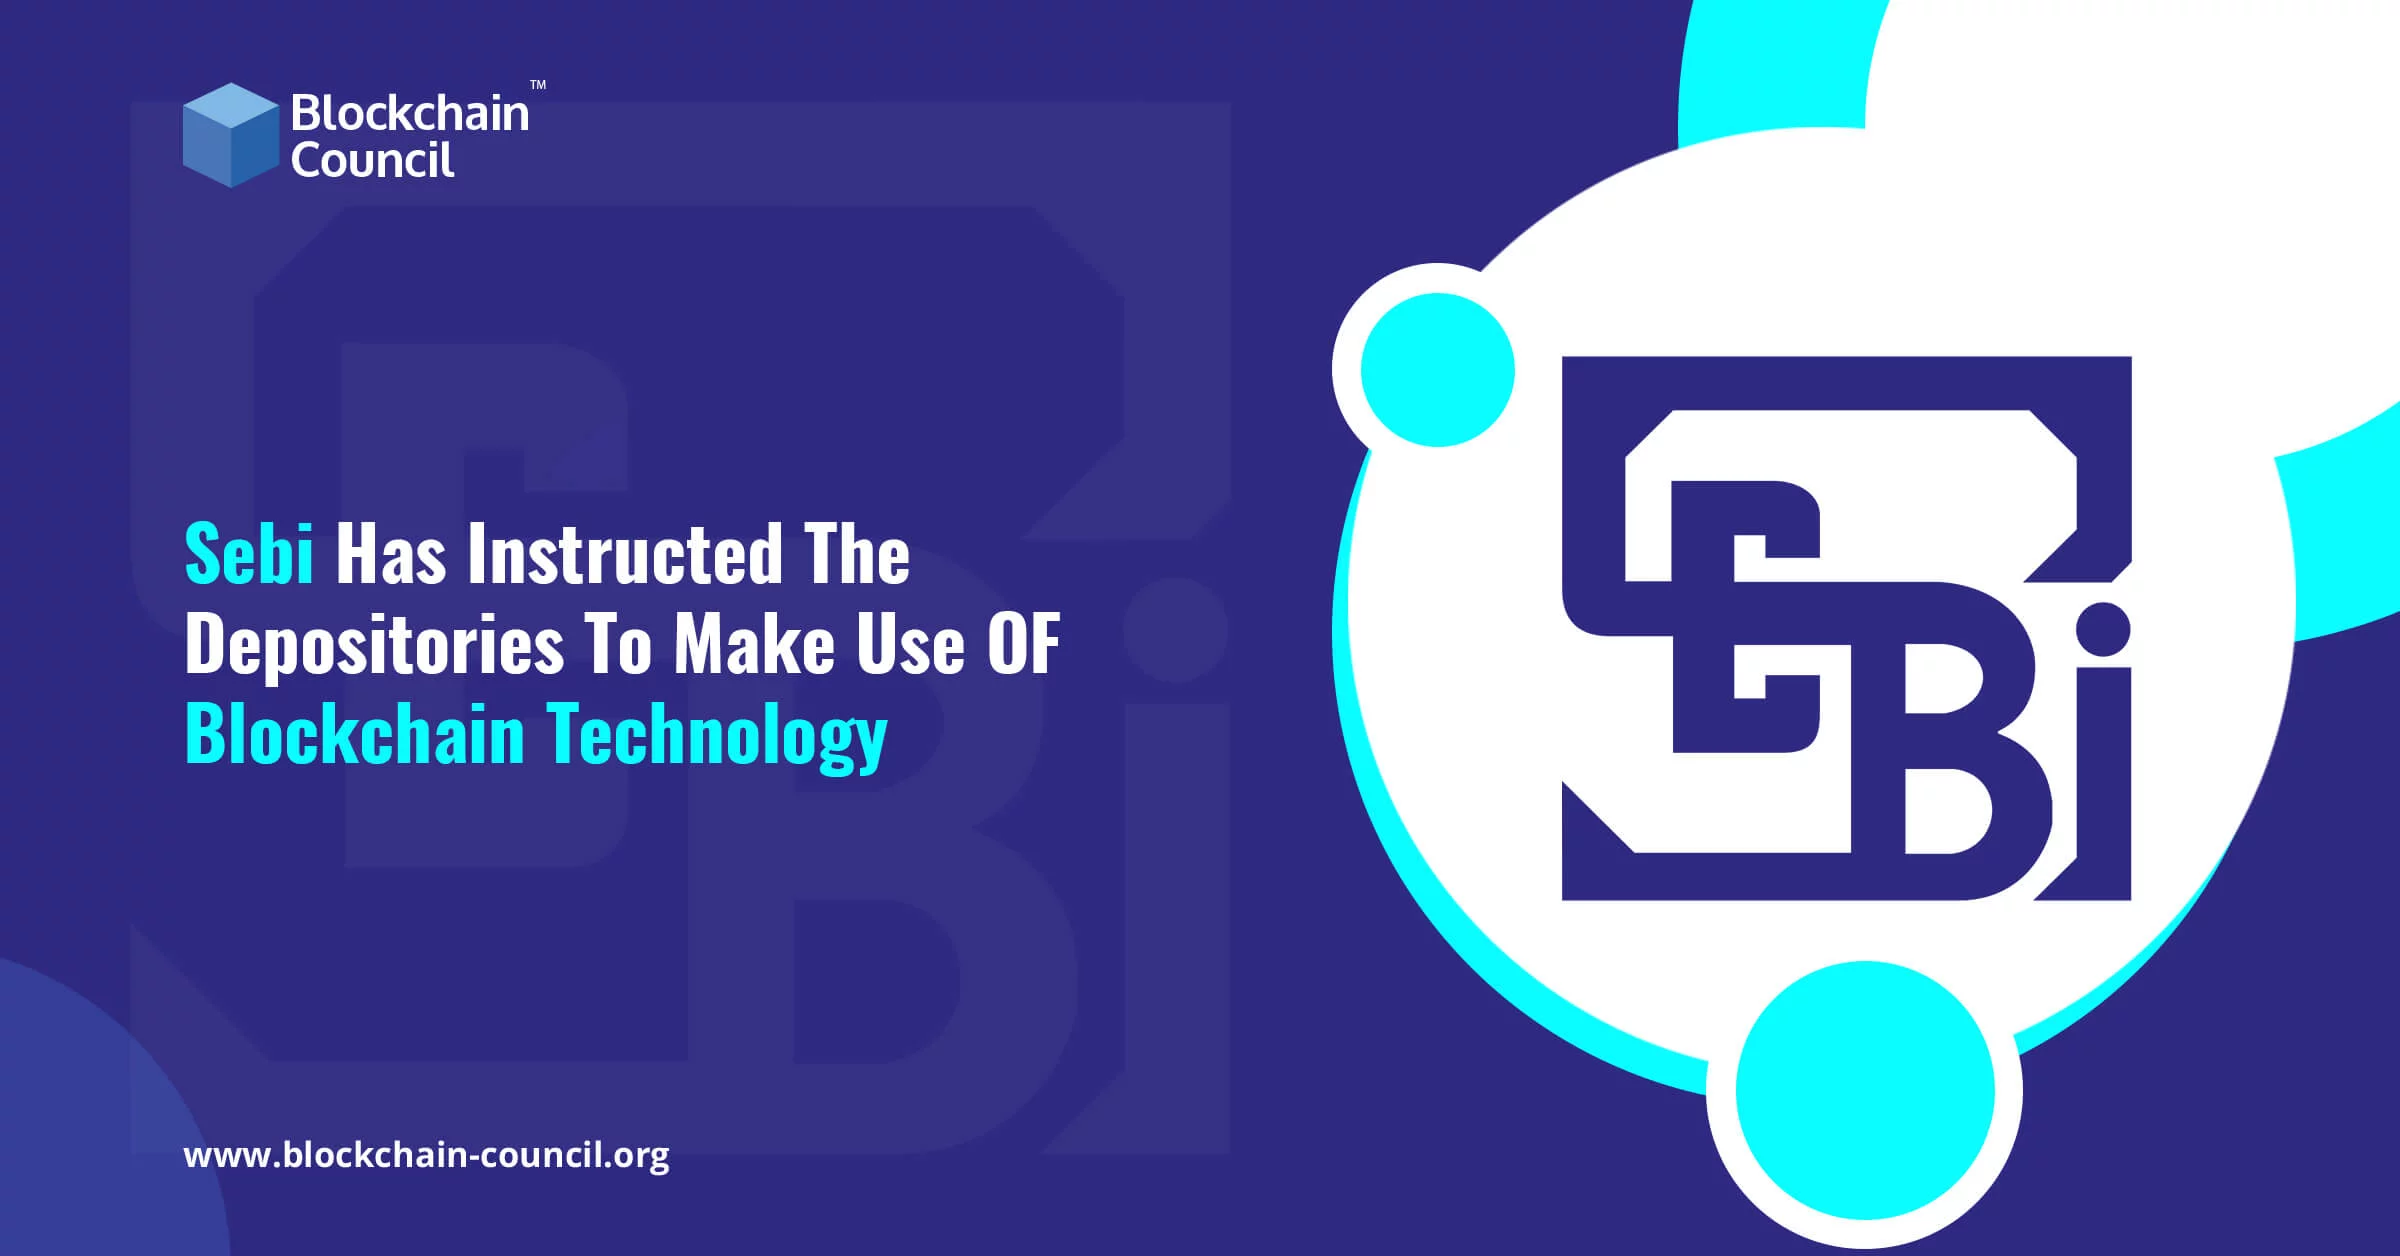 Sebi Has Instructed The Depositories To Make Use OF Blockchain Technology